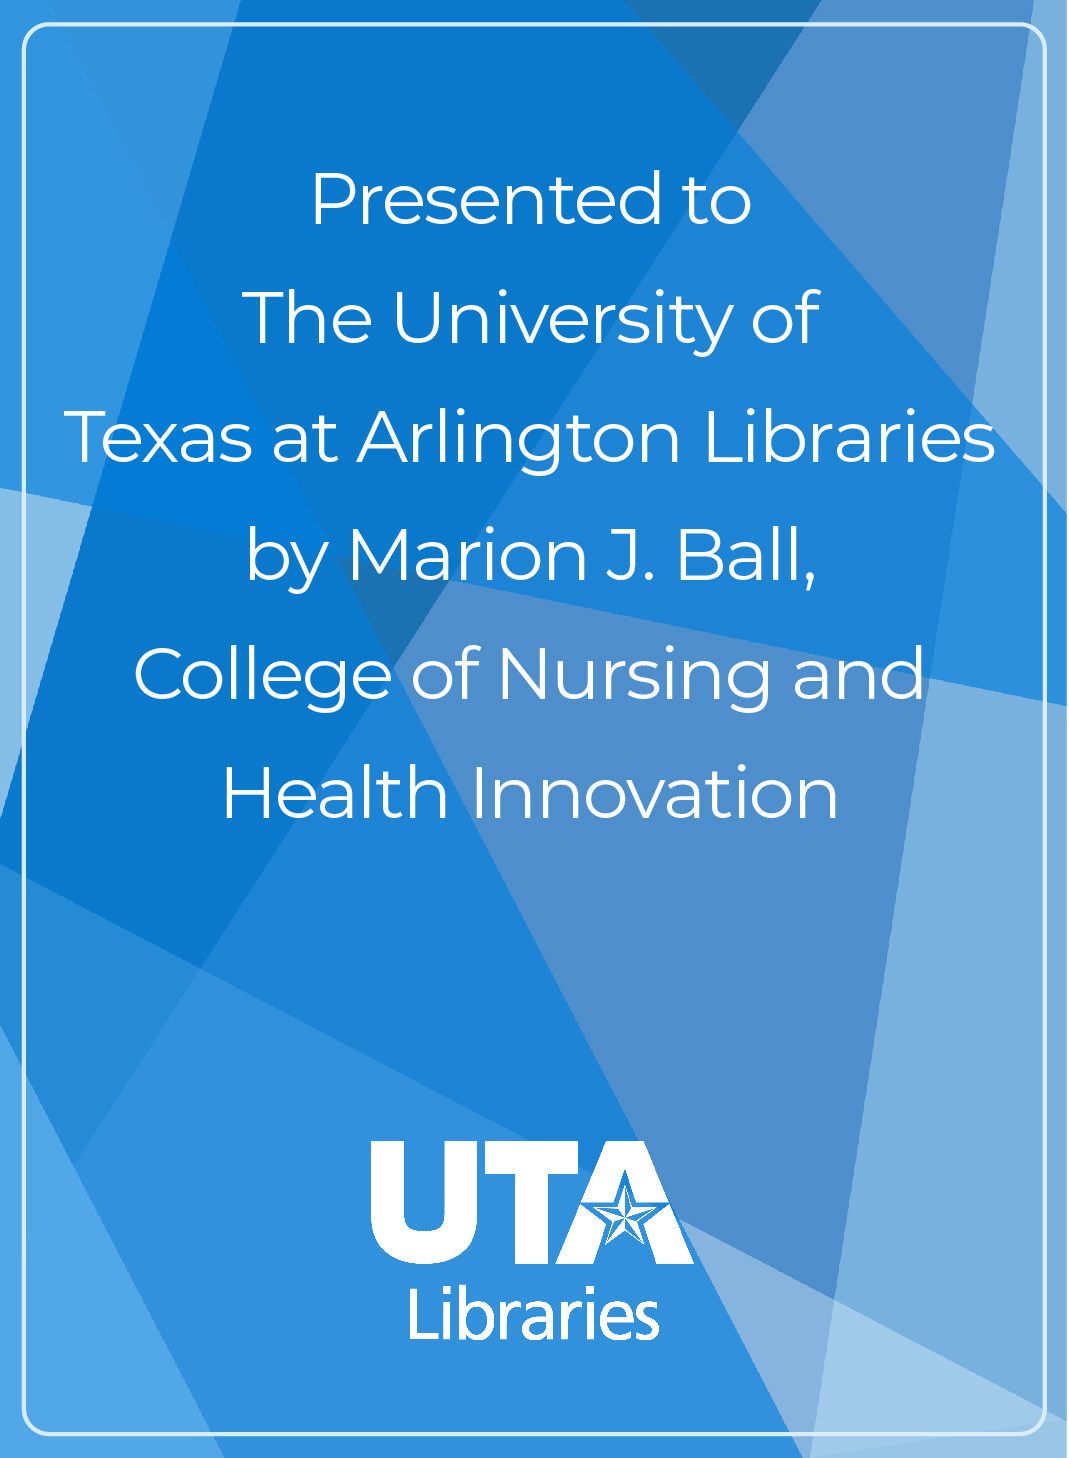 Presented to The University of Texas at Arlington Libraries by Marion J. Ball, College of Nursing and Health Innovation